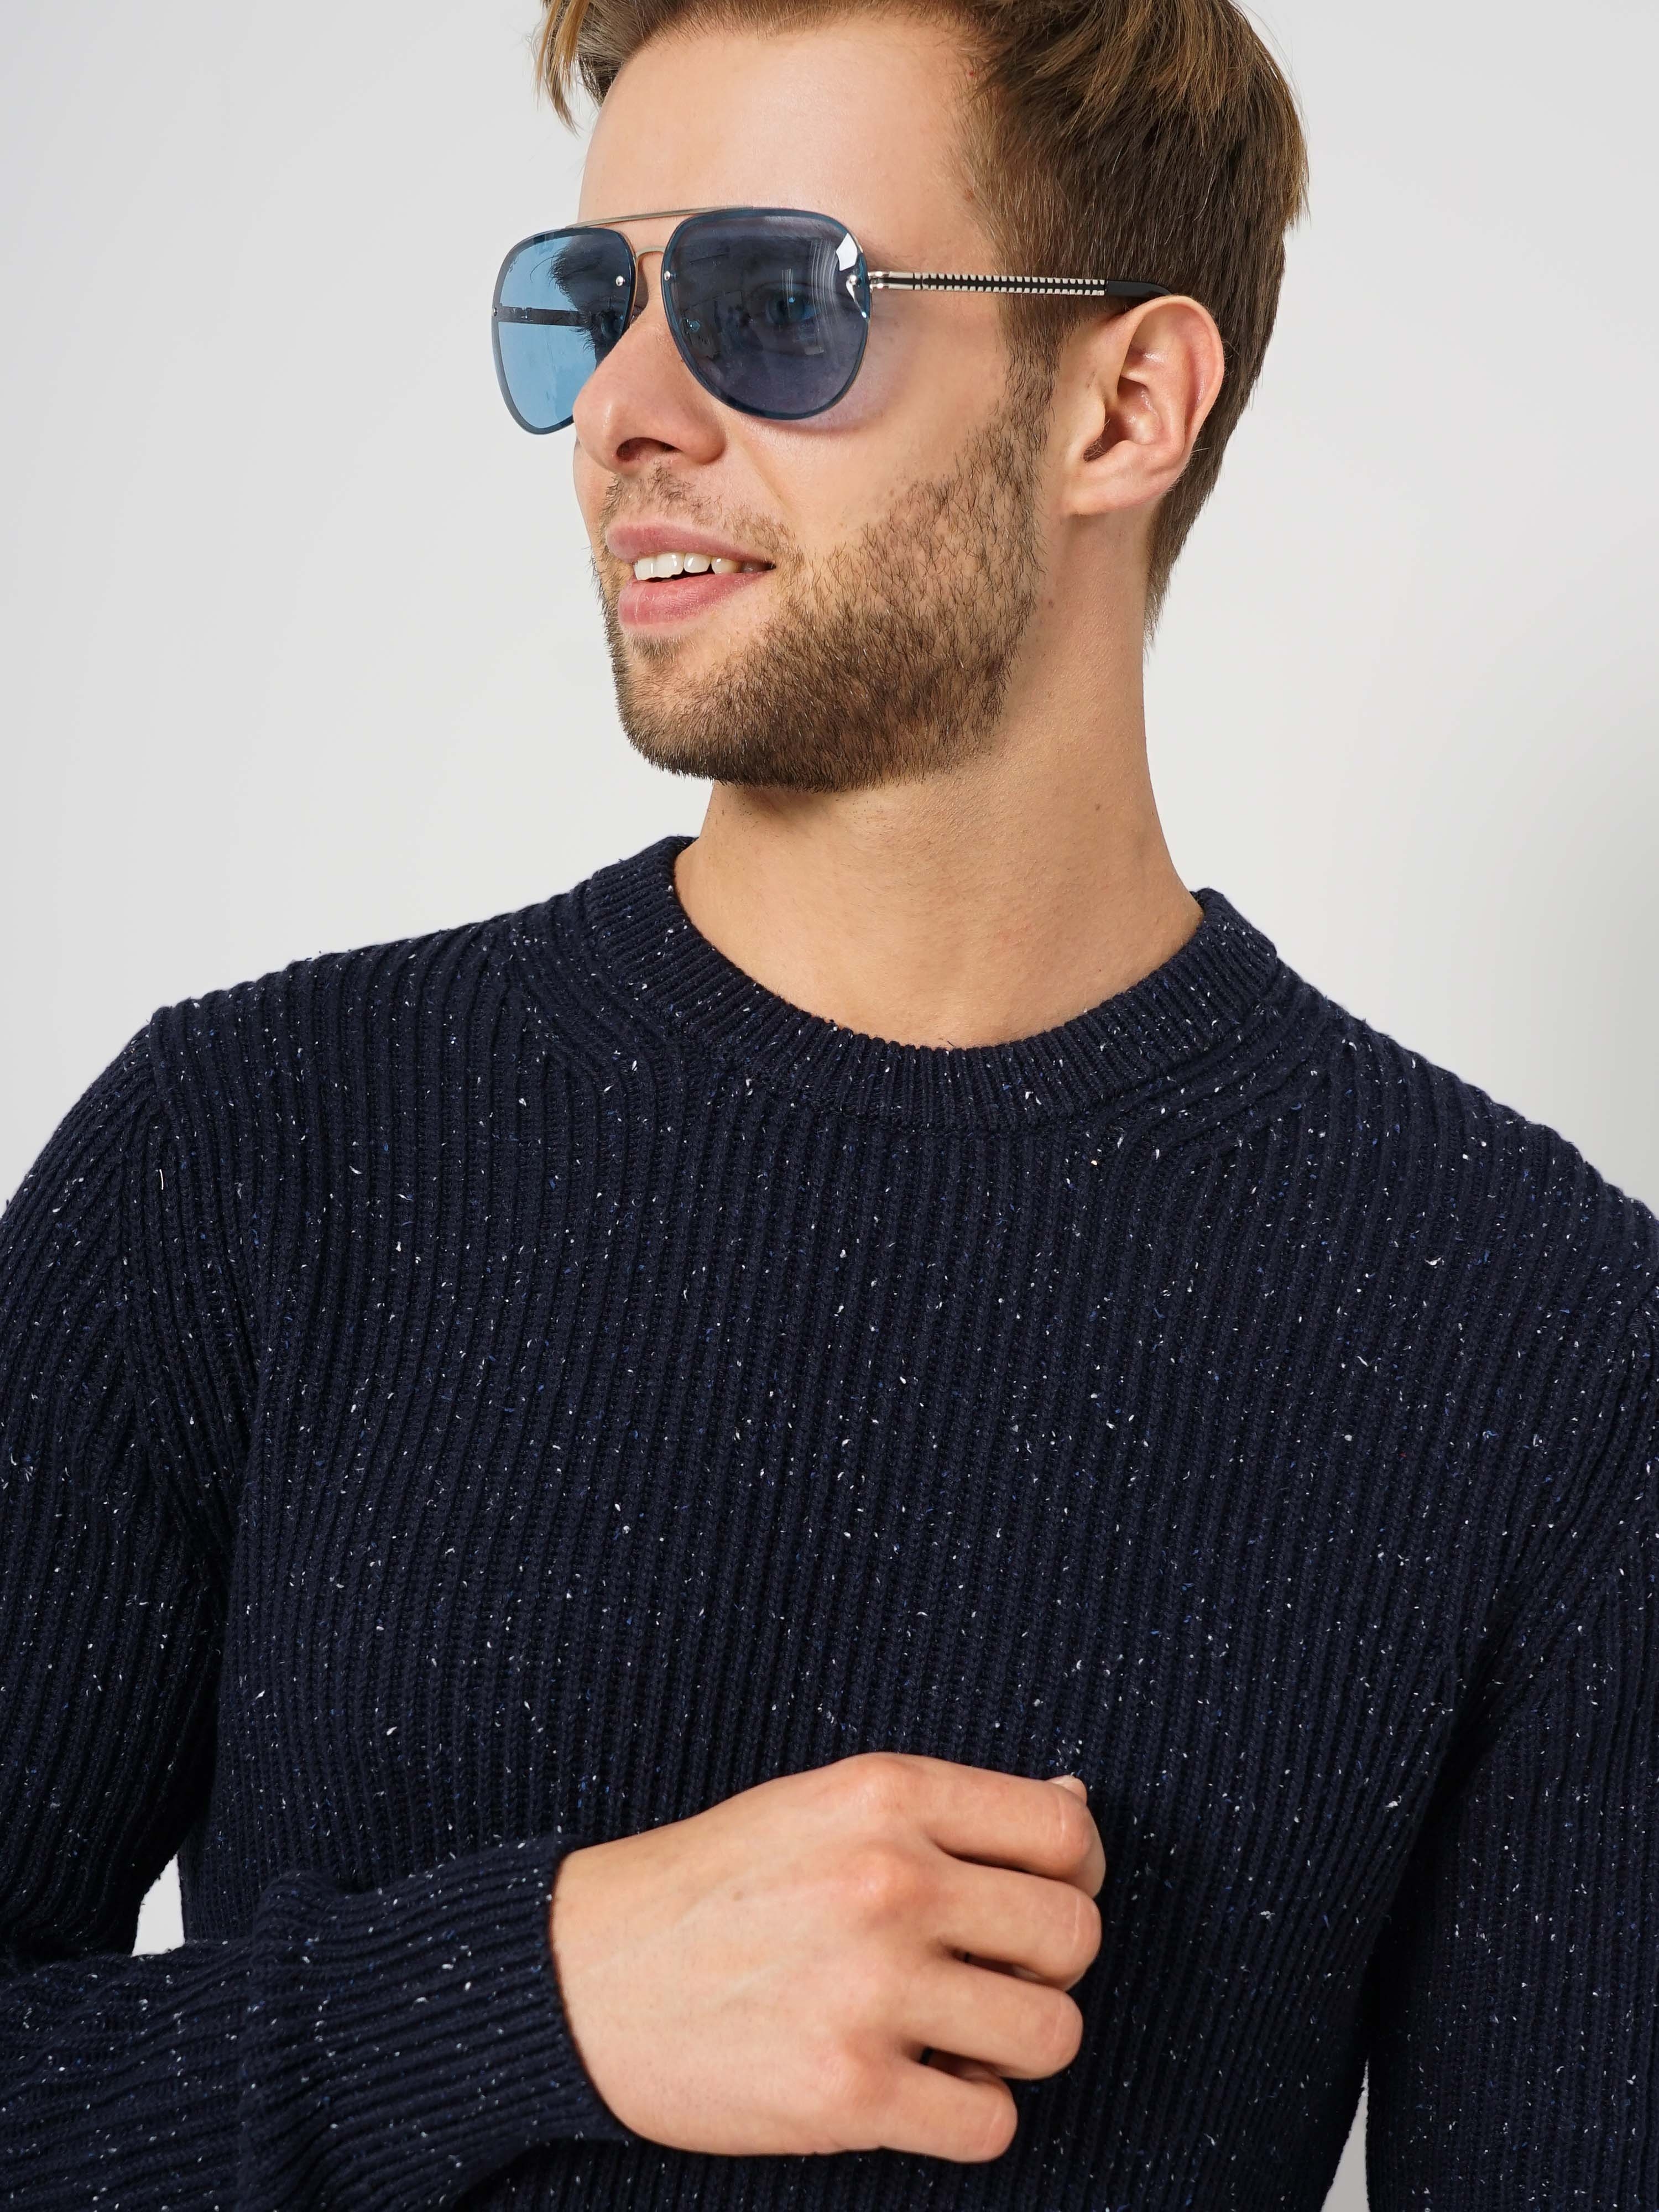 Men's Blue Knitted Sweaters